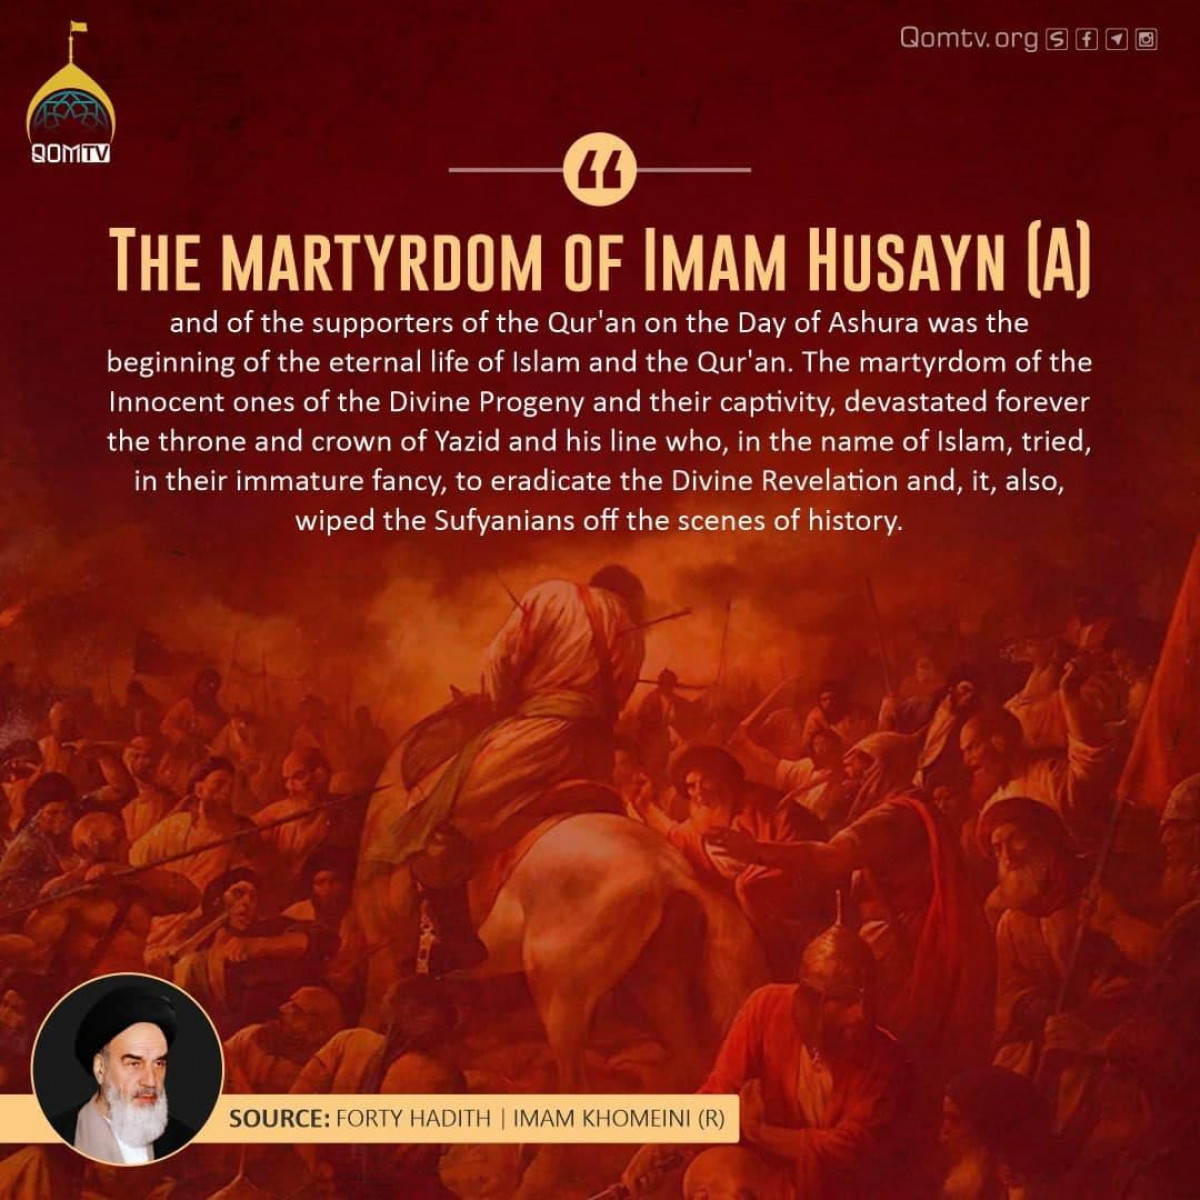 The martyrdom of Imam Husayn (A) and of the supporters of the Qur'an